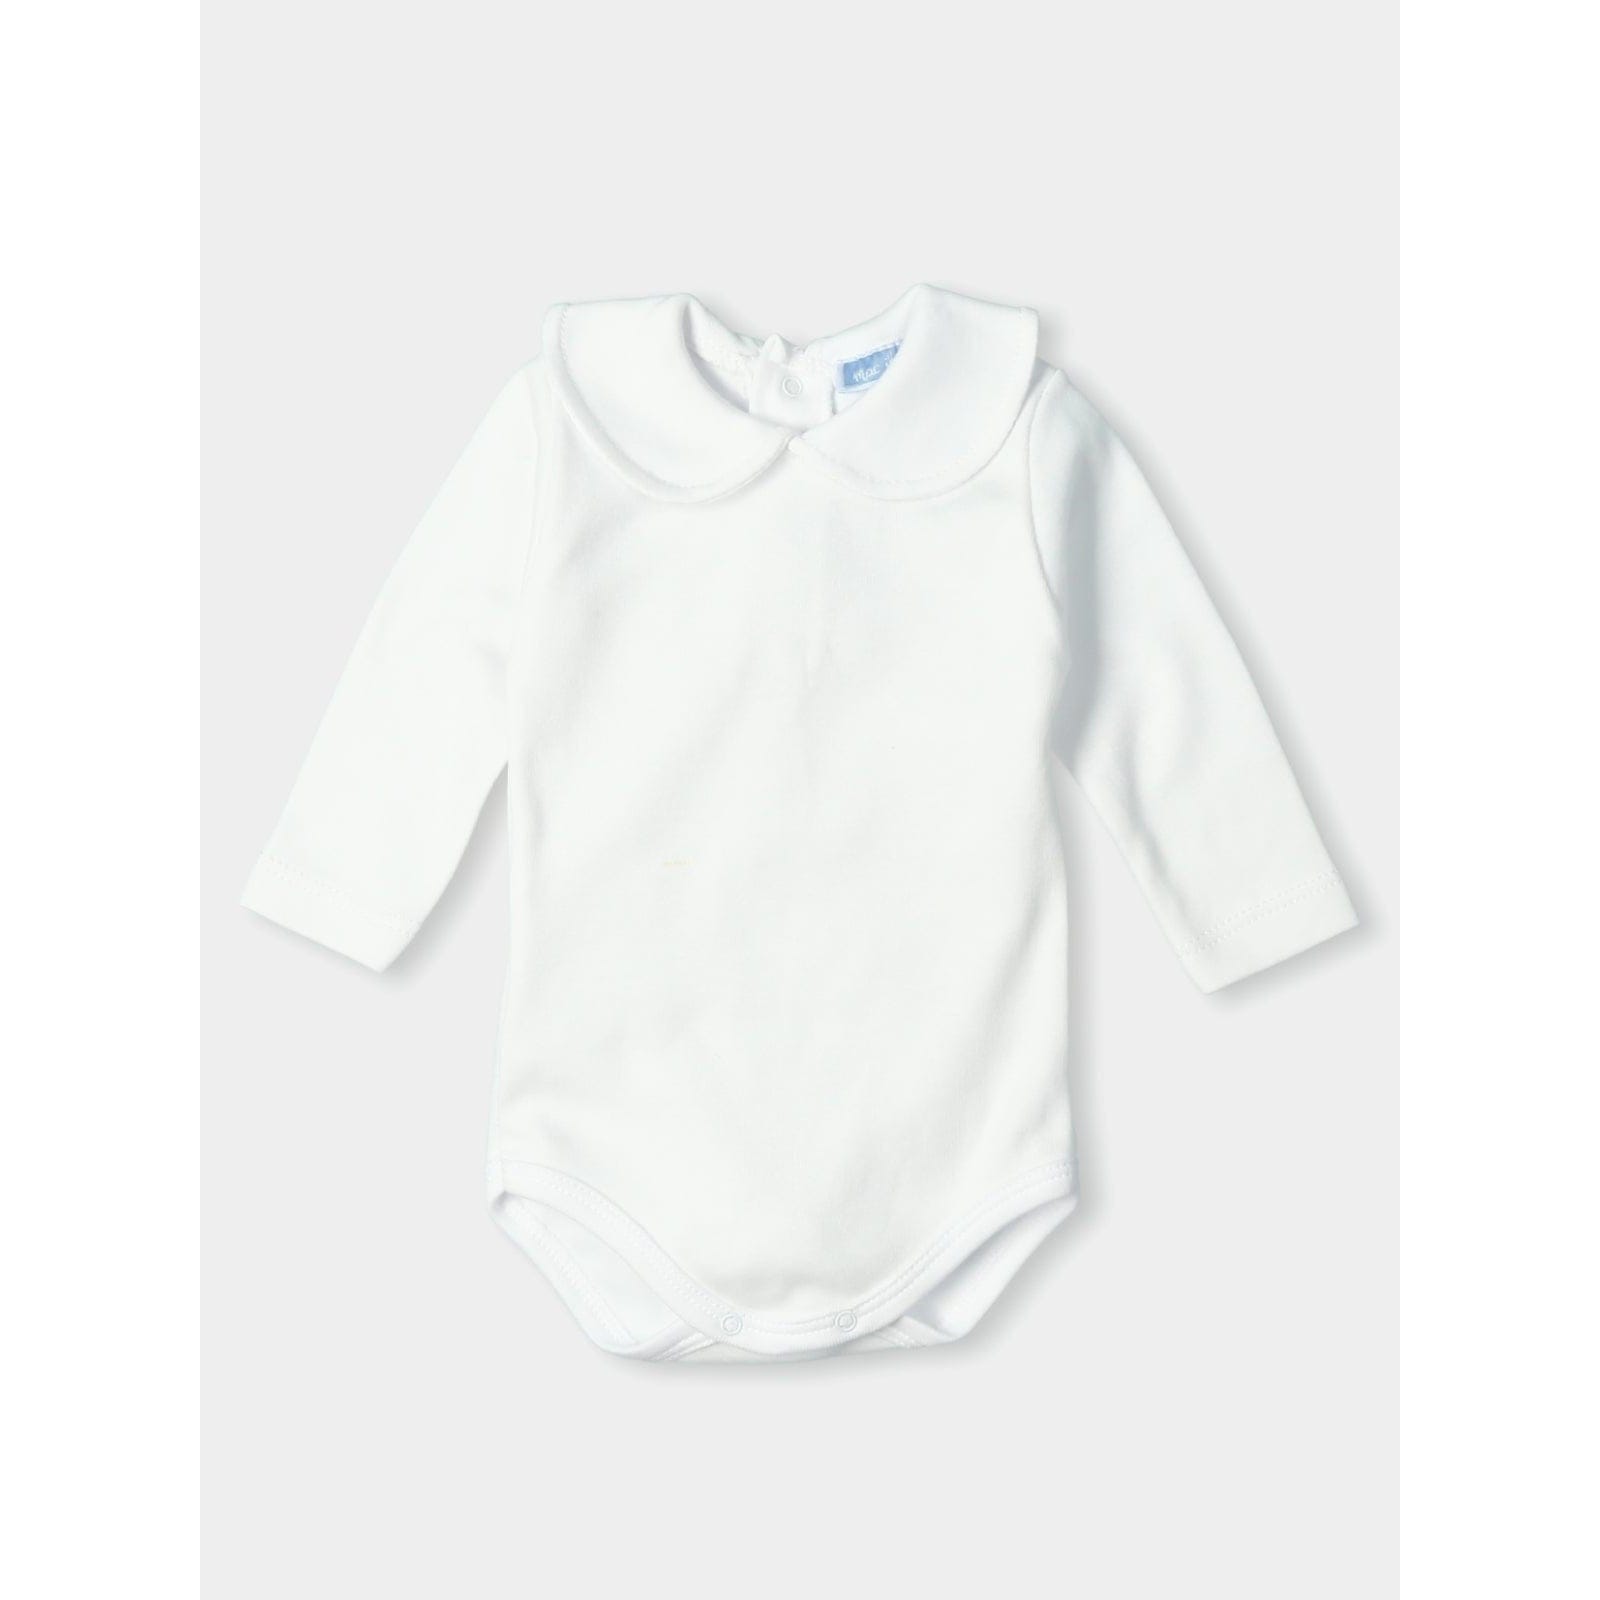 Mac Ilusion Sets Mac Ilusion Baby Boys White/Cloud Bodysuit + Dungarees Outfits